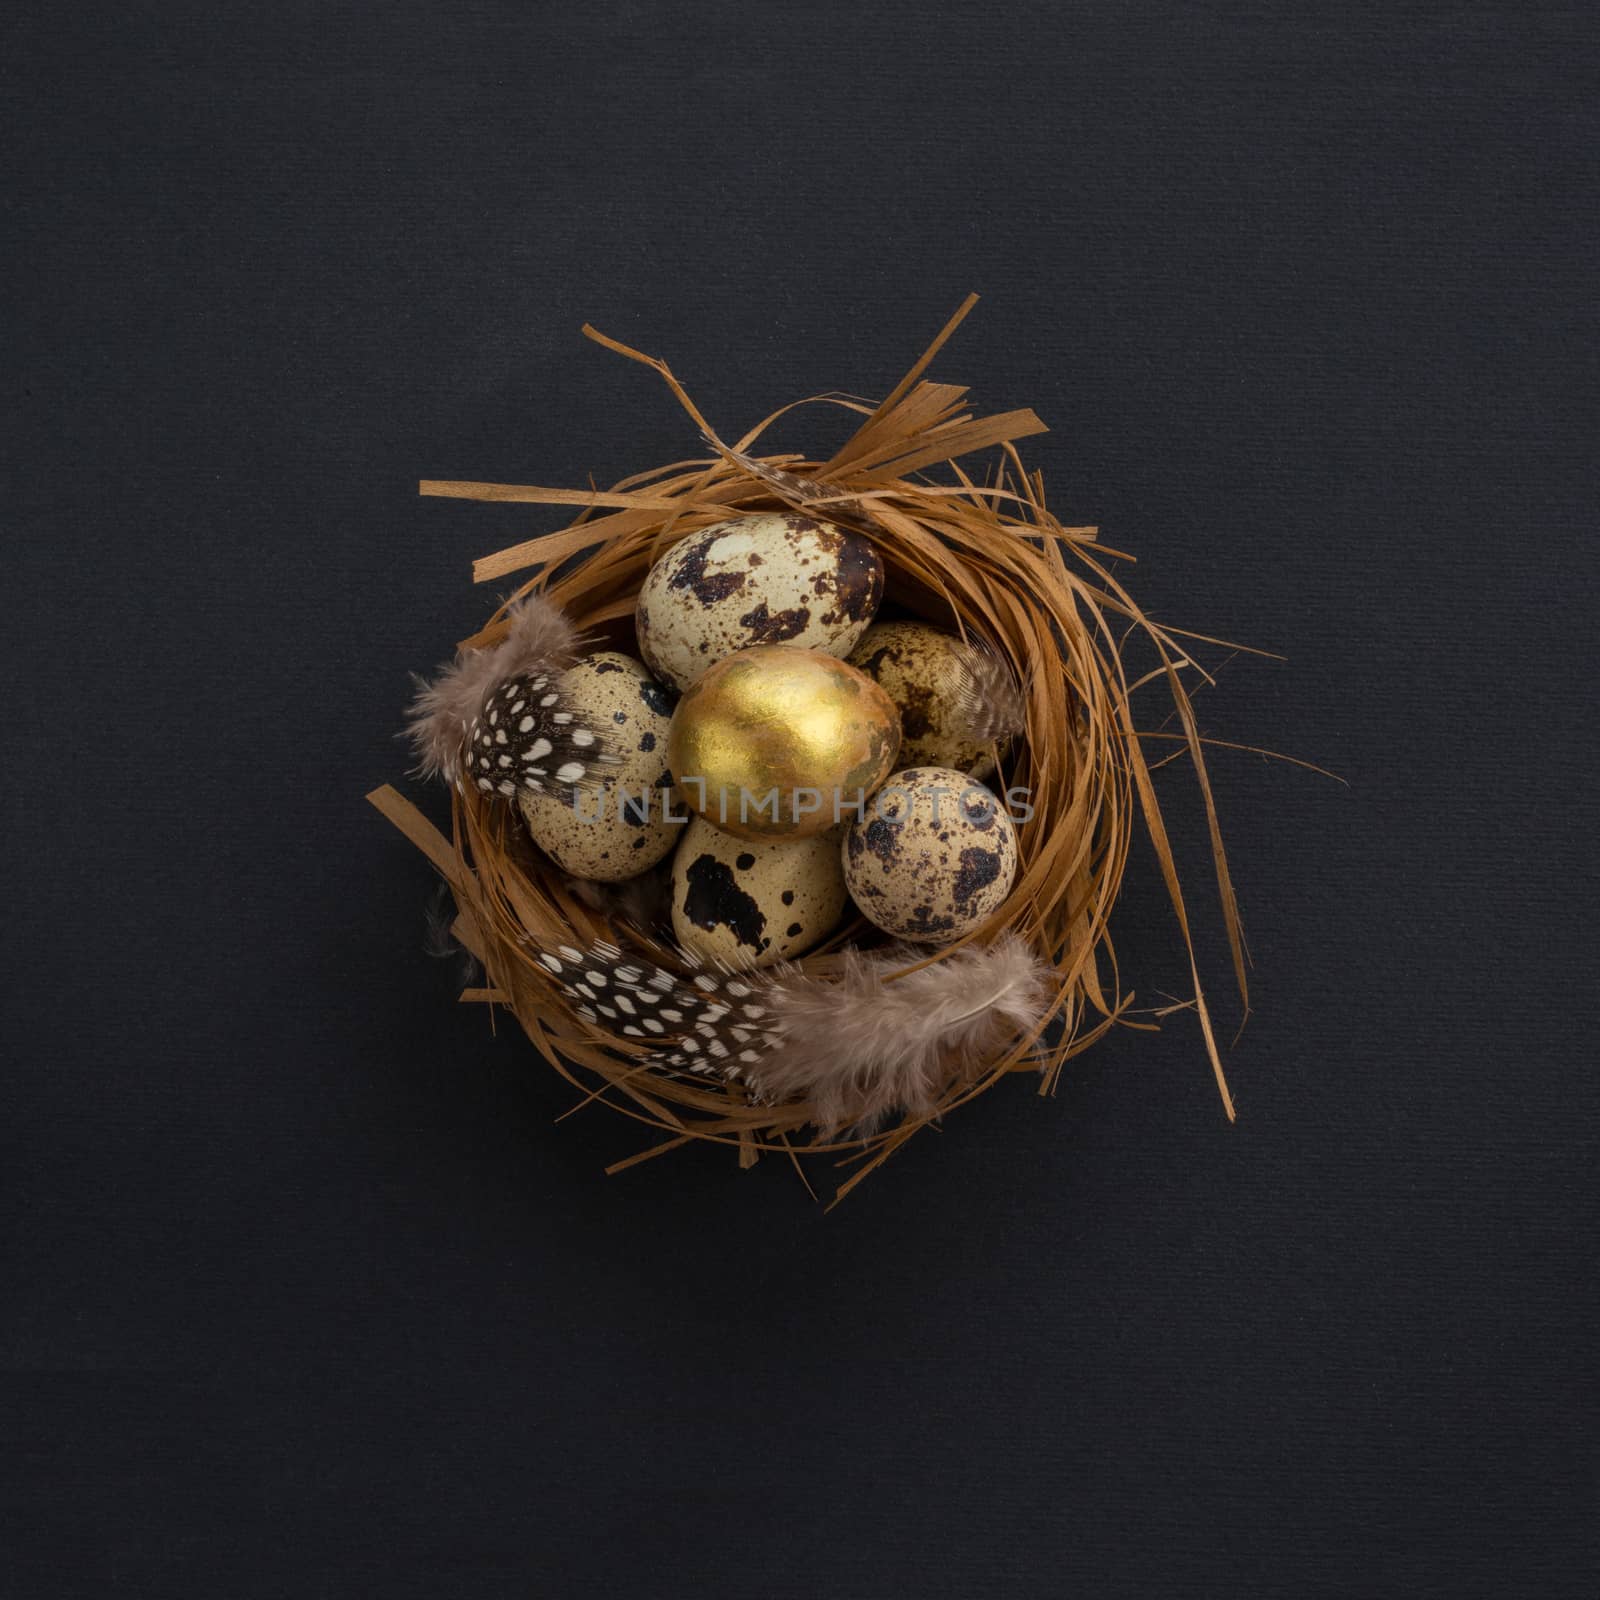 Easter nest with quail eggs by destillat